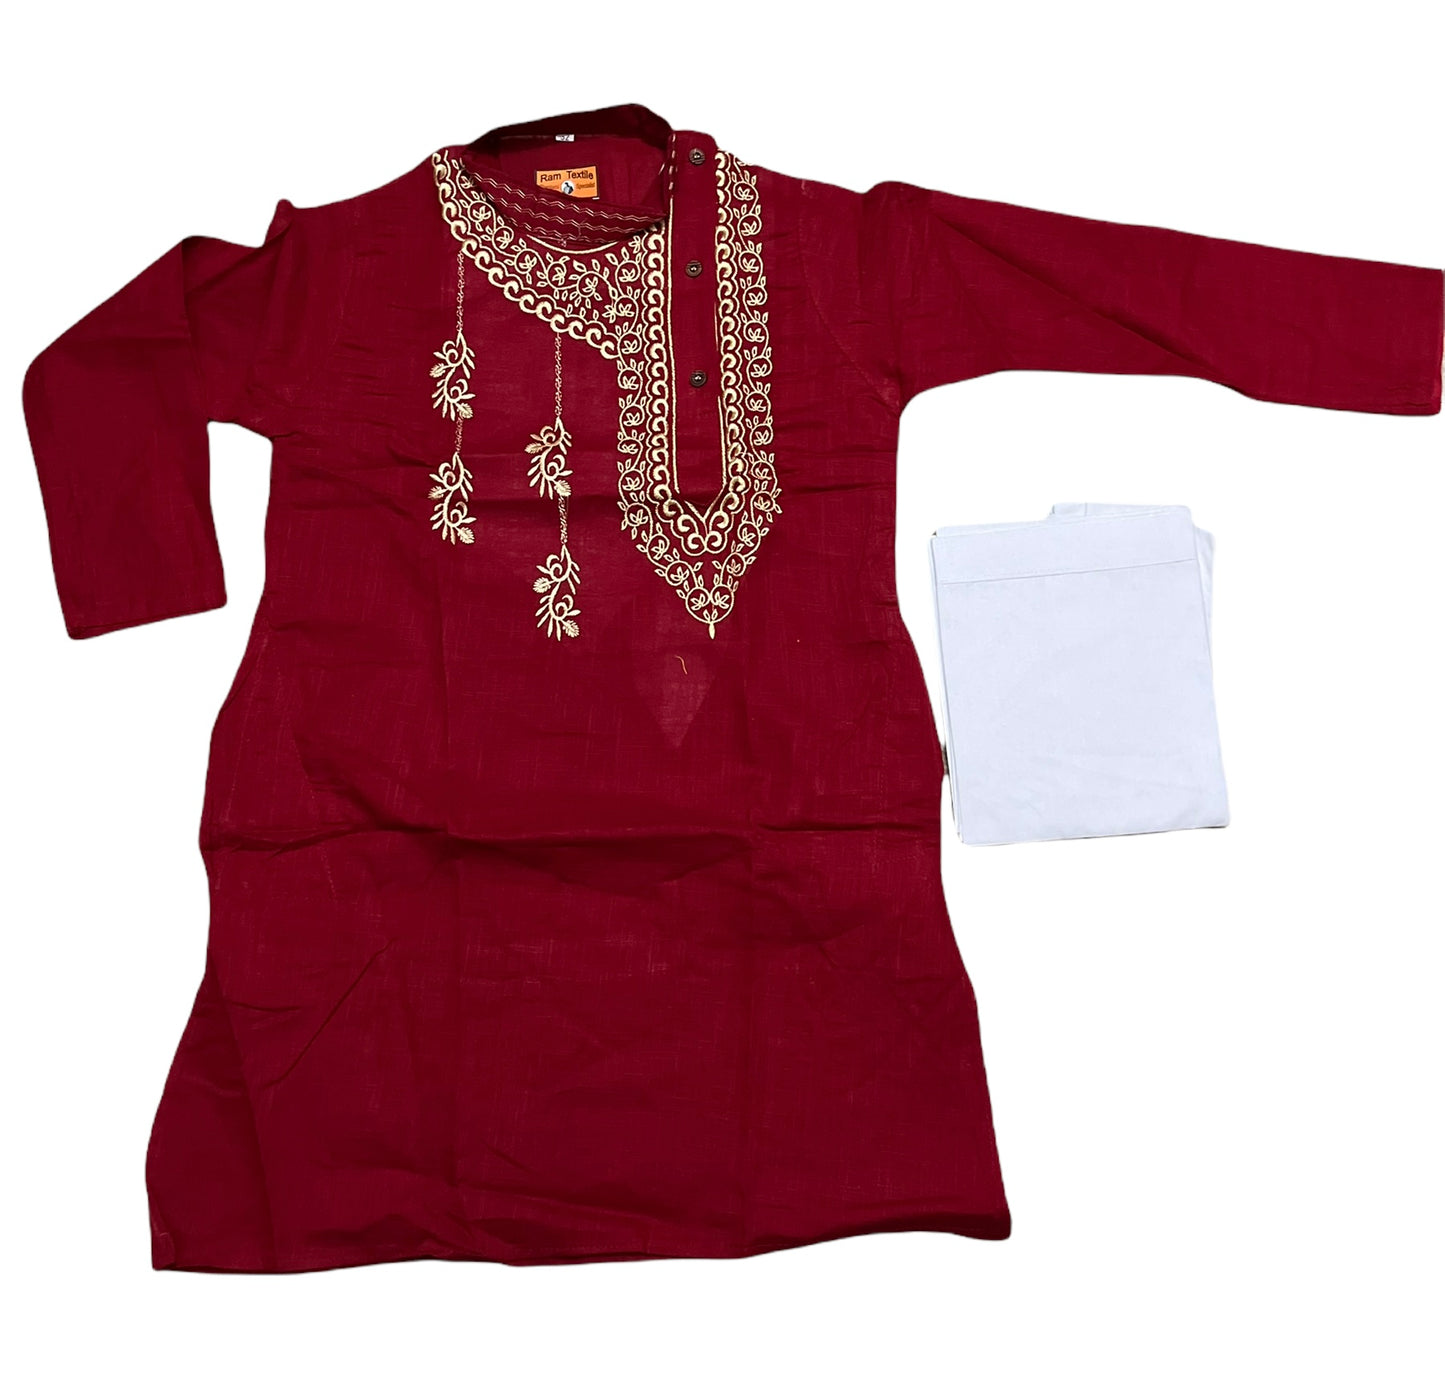 Red Great Value Boys Kurta Pajama: Stylish and Affordable Traditional Attire